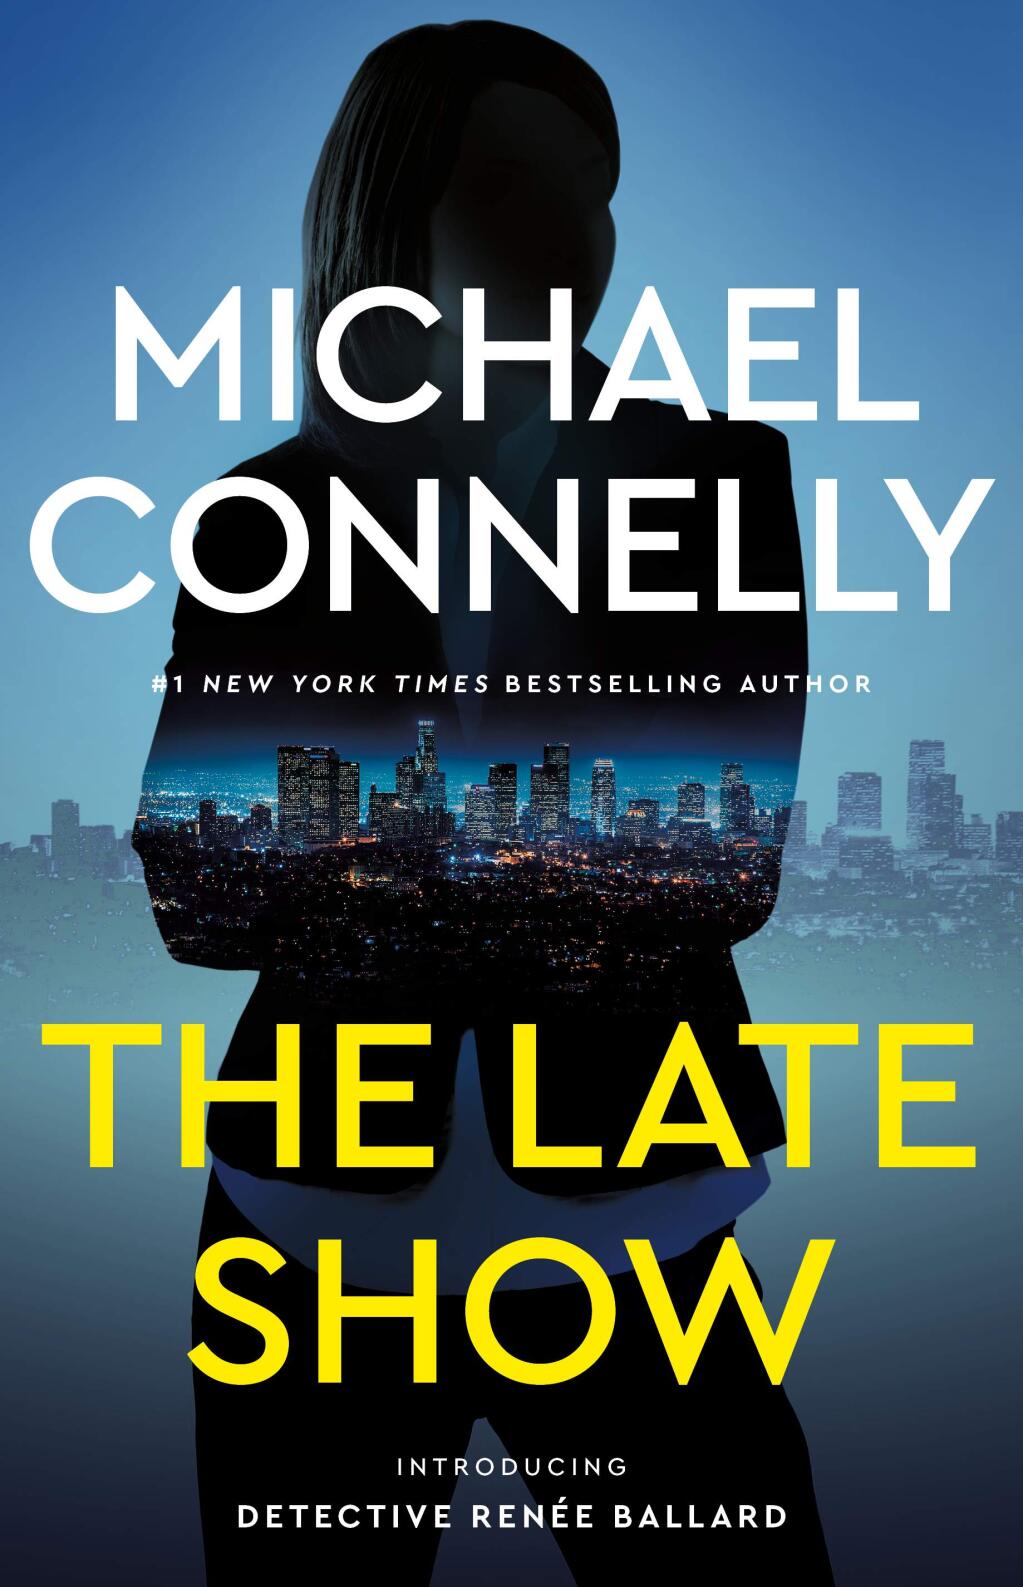 New to the list is this Hollywood-based crime thriller, now out in paperback.